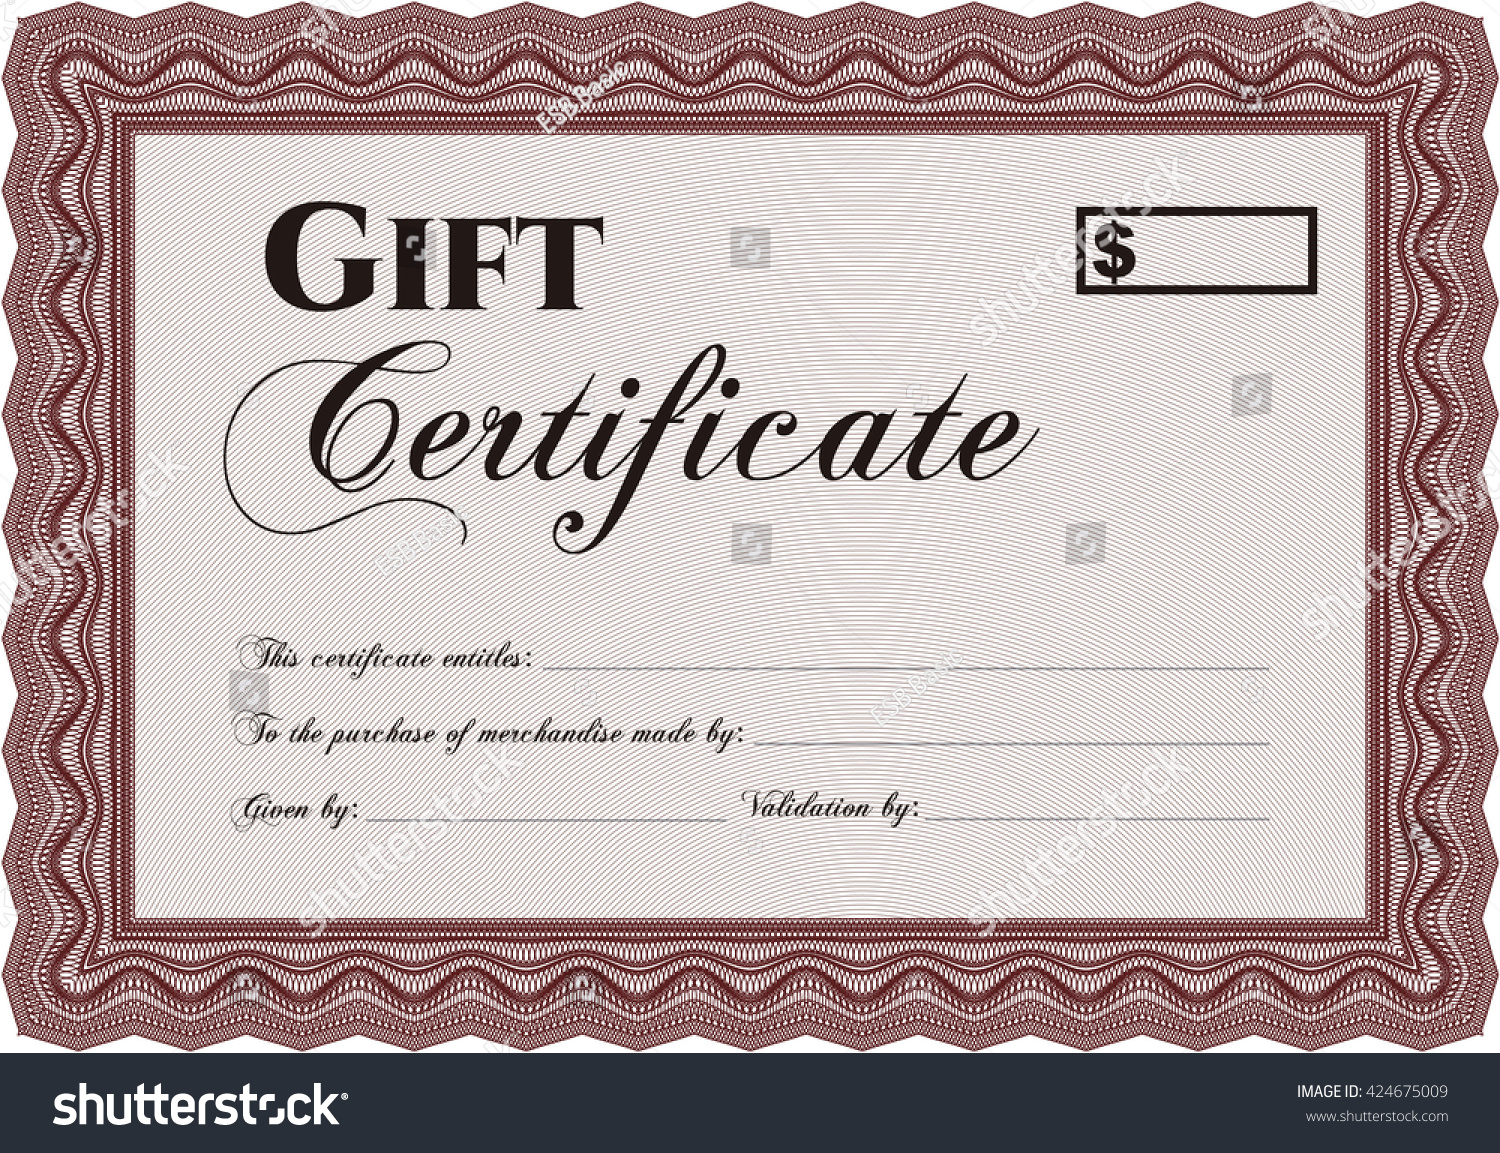 Formal Gift Certificate Complex Background Border Stock Vector  Throughout This Entitles The Bearer To Template Certificate